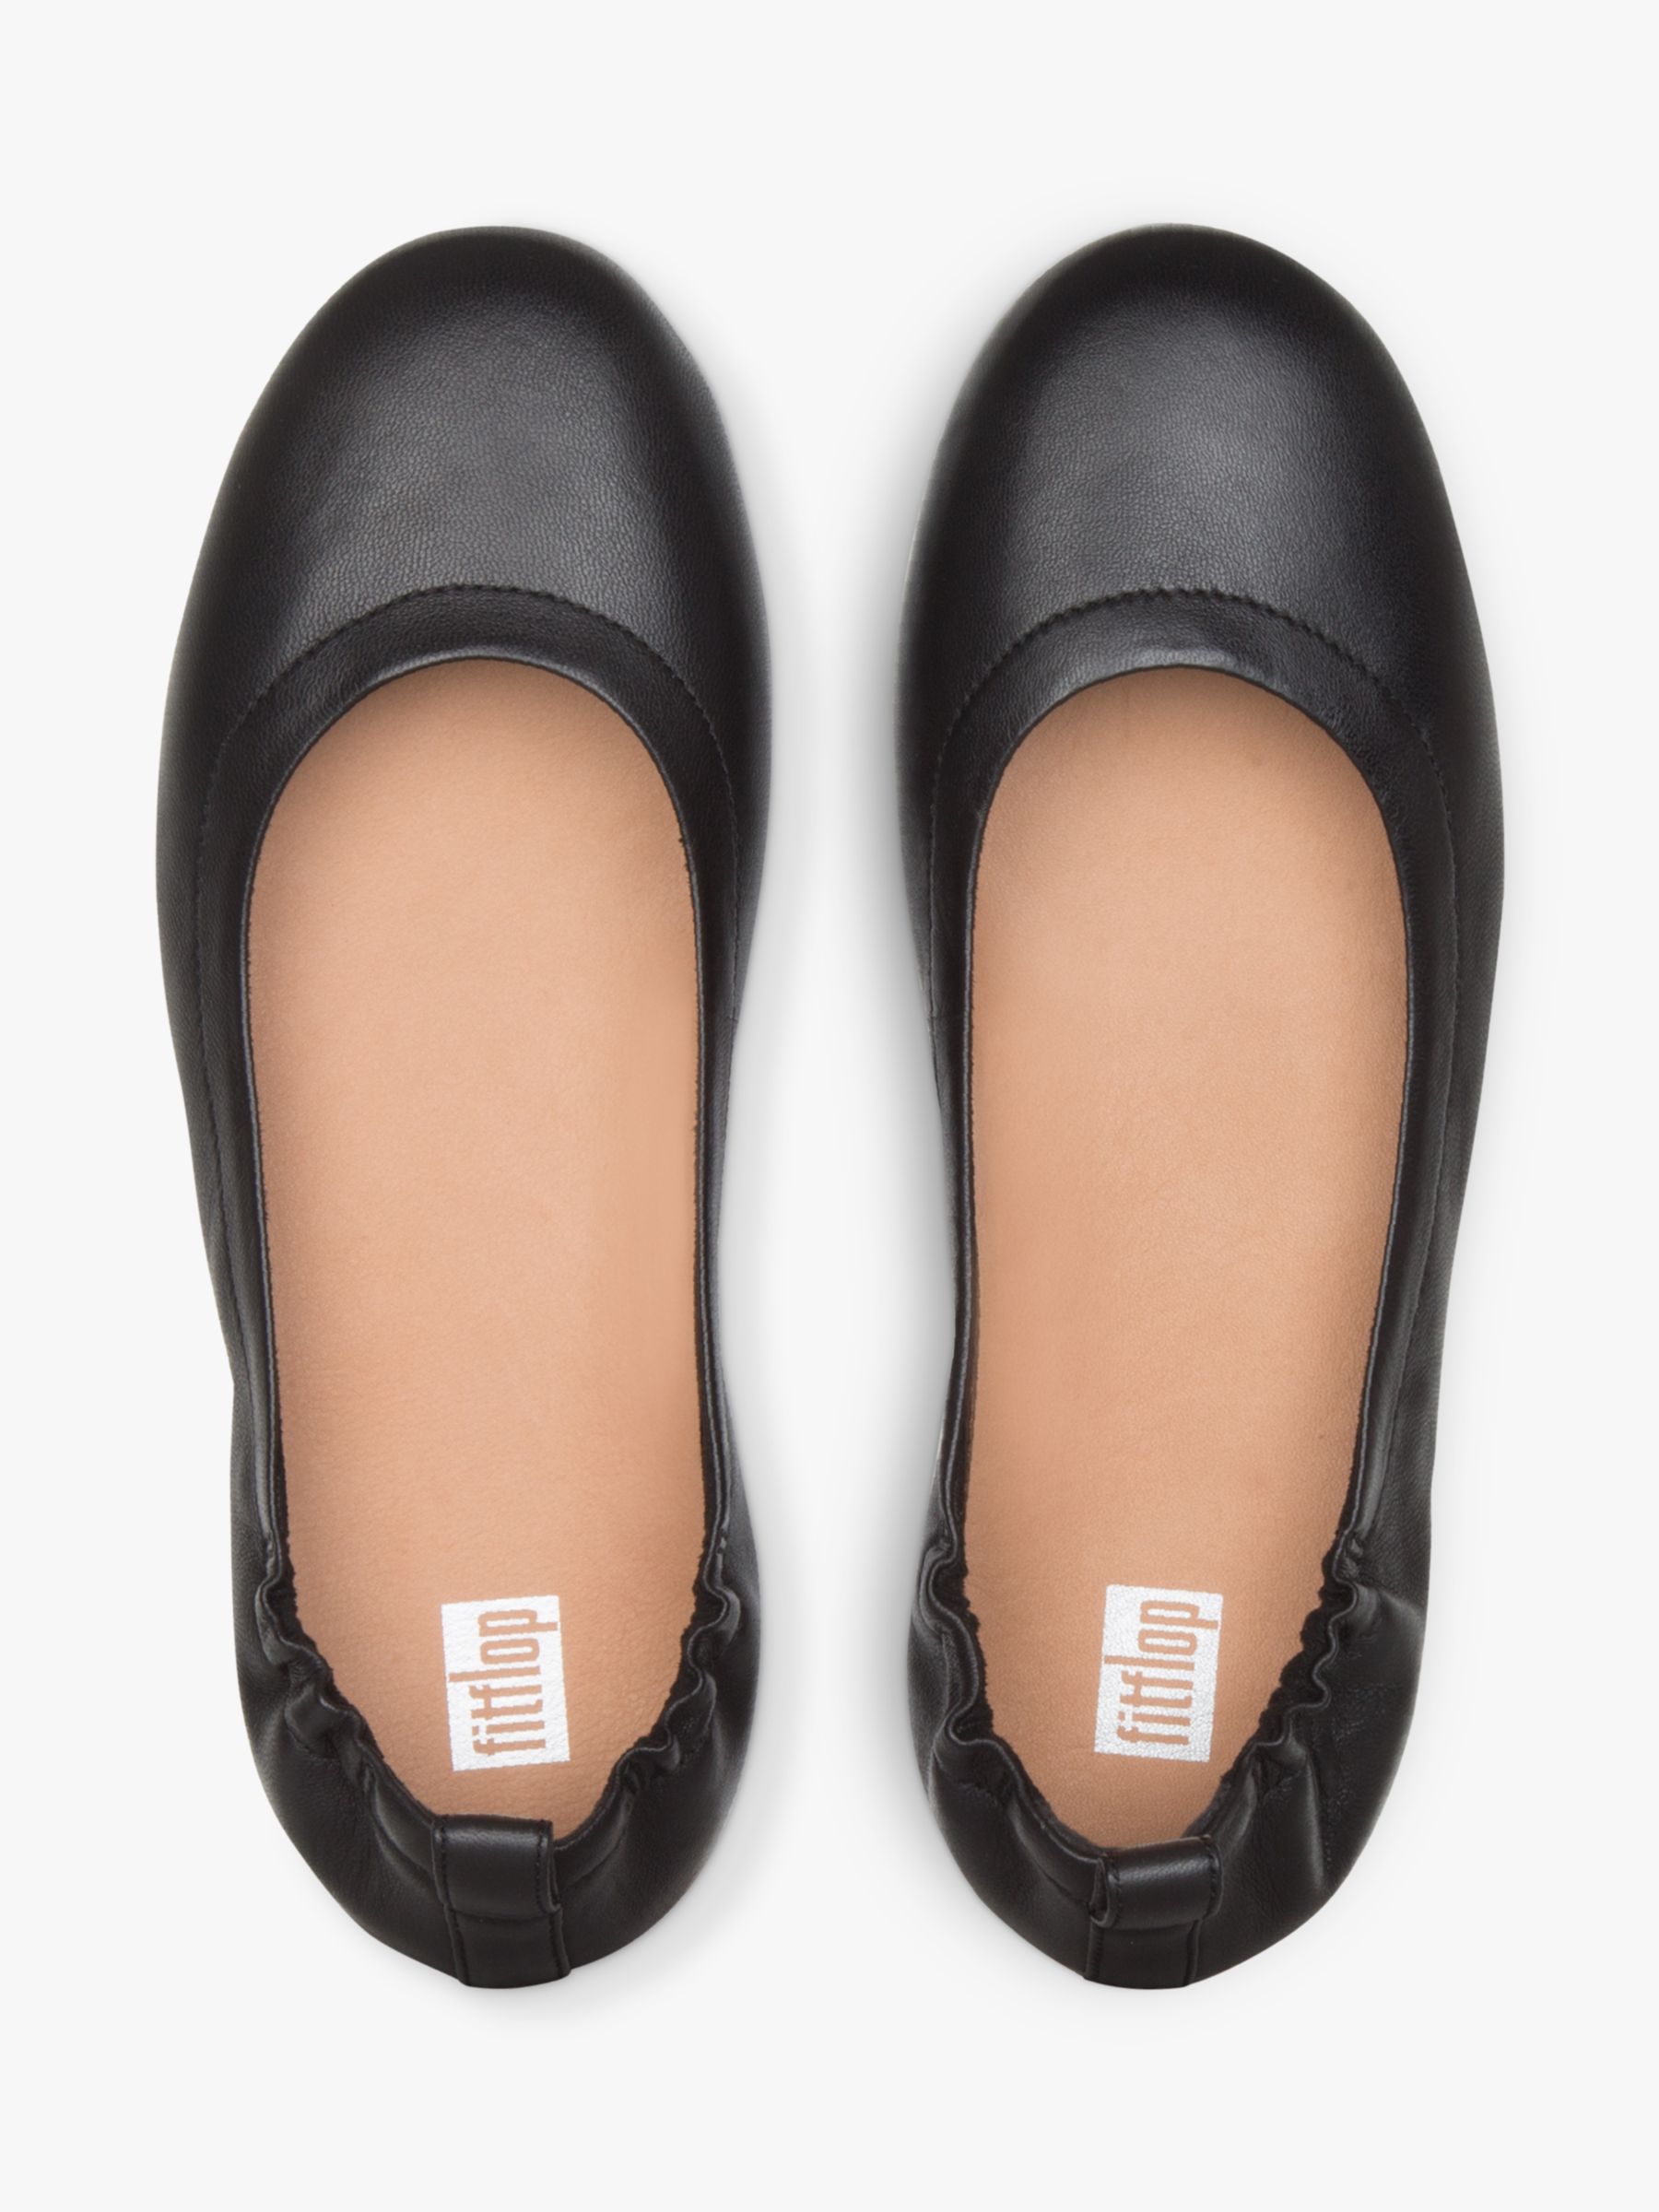 FitFlop Allegro Flat Leather Pumps, Black, 7